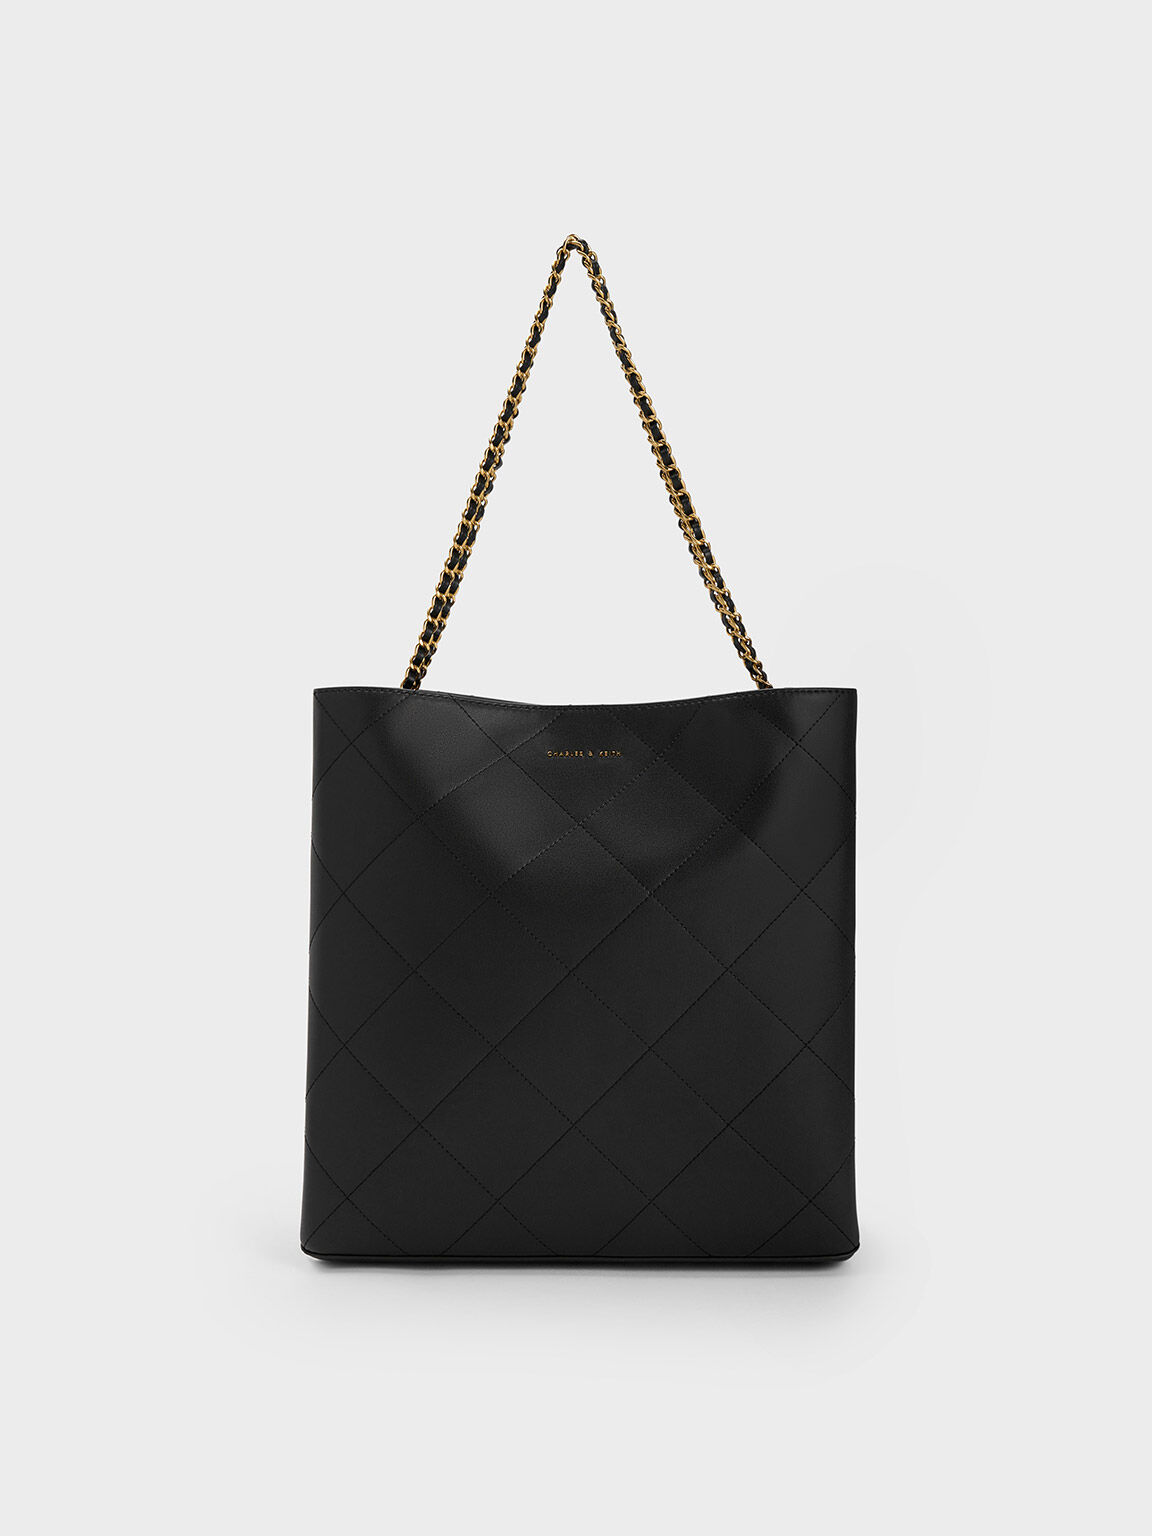 Túi tote Braided Handle Quilted, Đen, hi-res